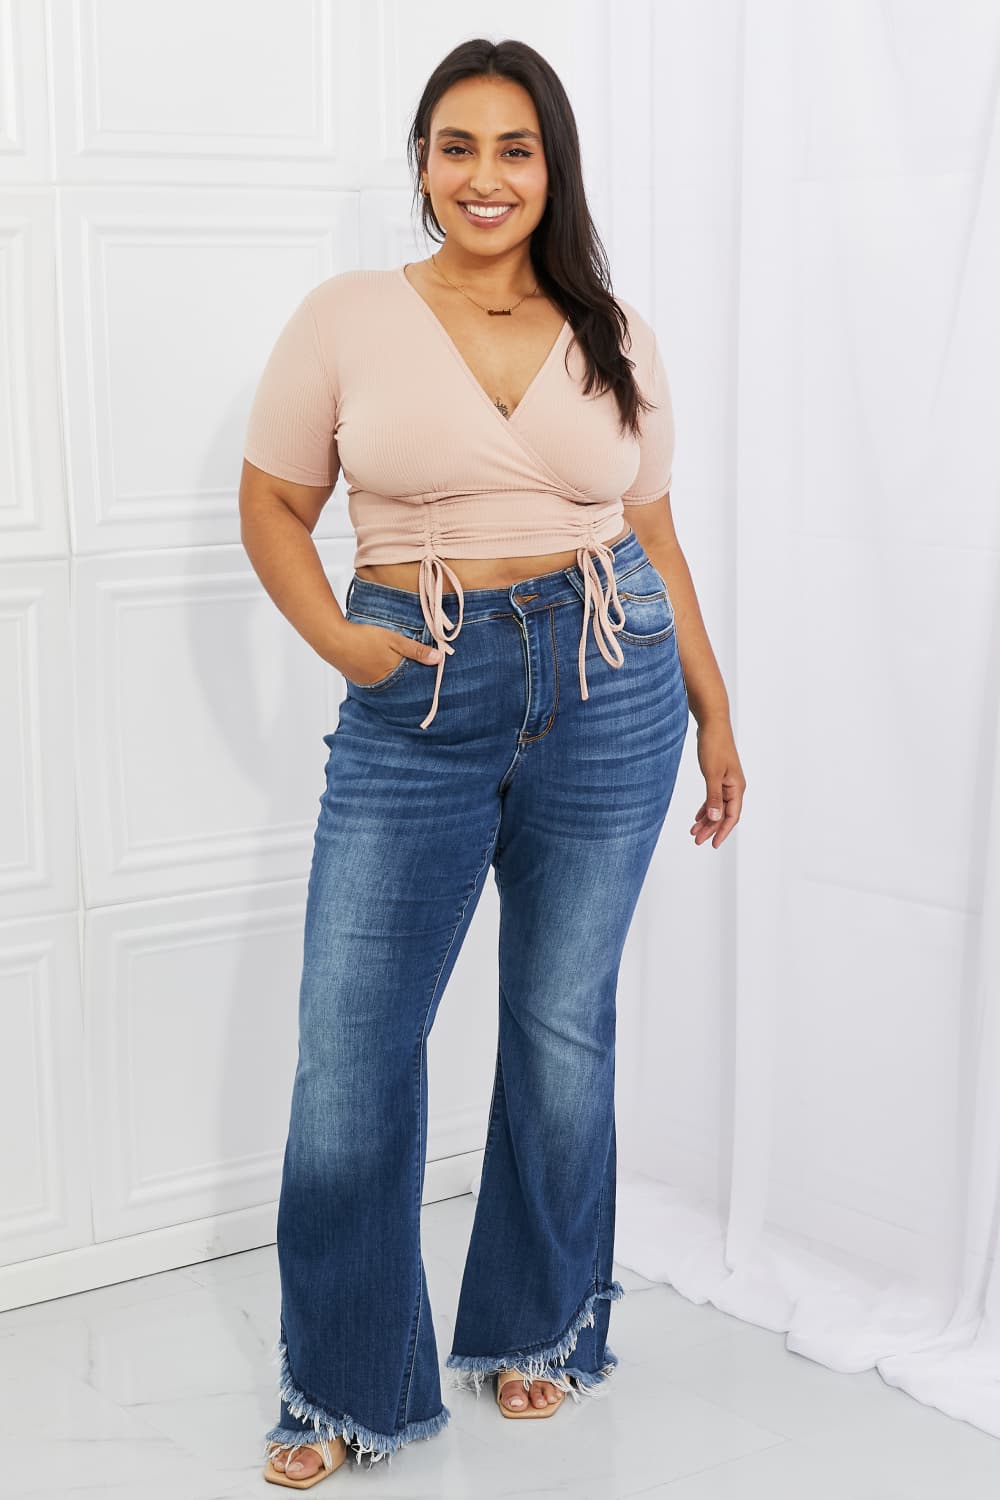 Back To Simple Ribbed Front Scrunched Top in Blush